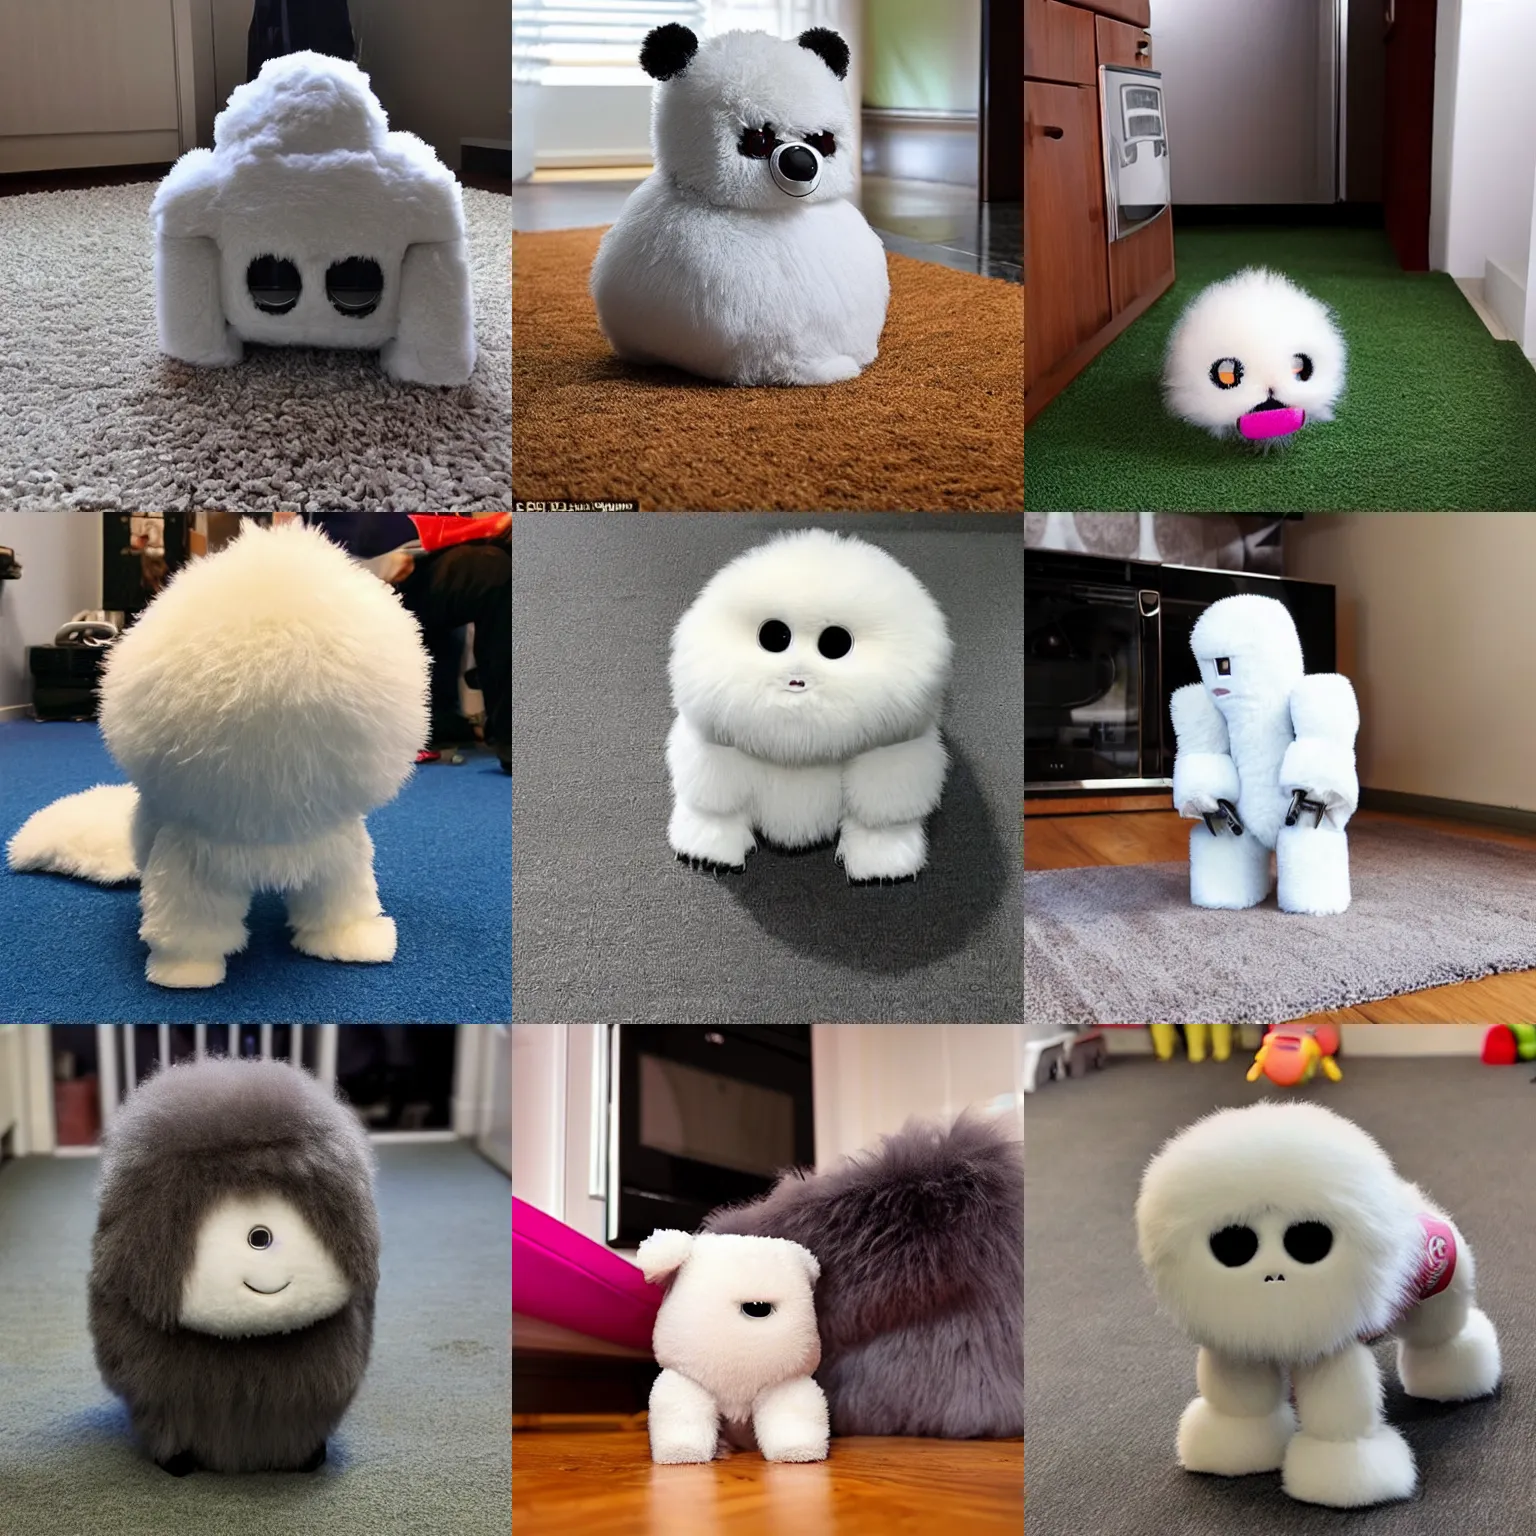 Prompt: <picture quality=hd+ mode='attention grabbing'>an adorable fluffy robot misbehaves and pees on the rug</picture>